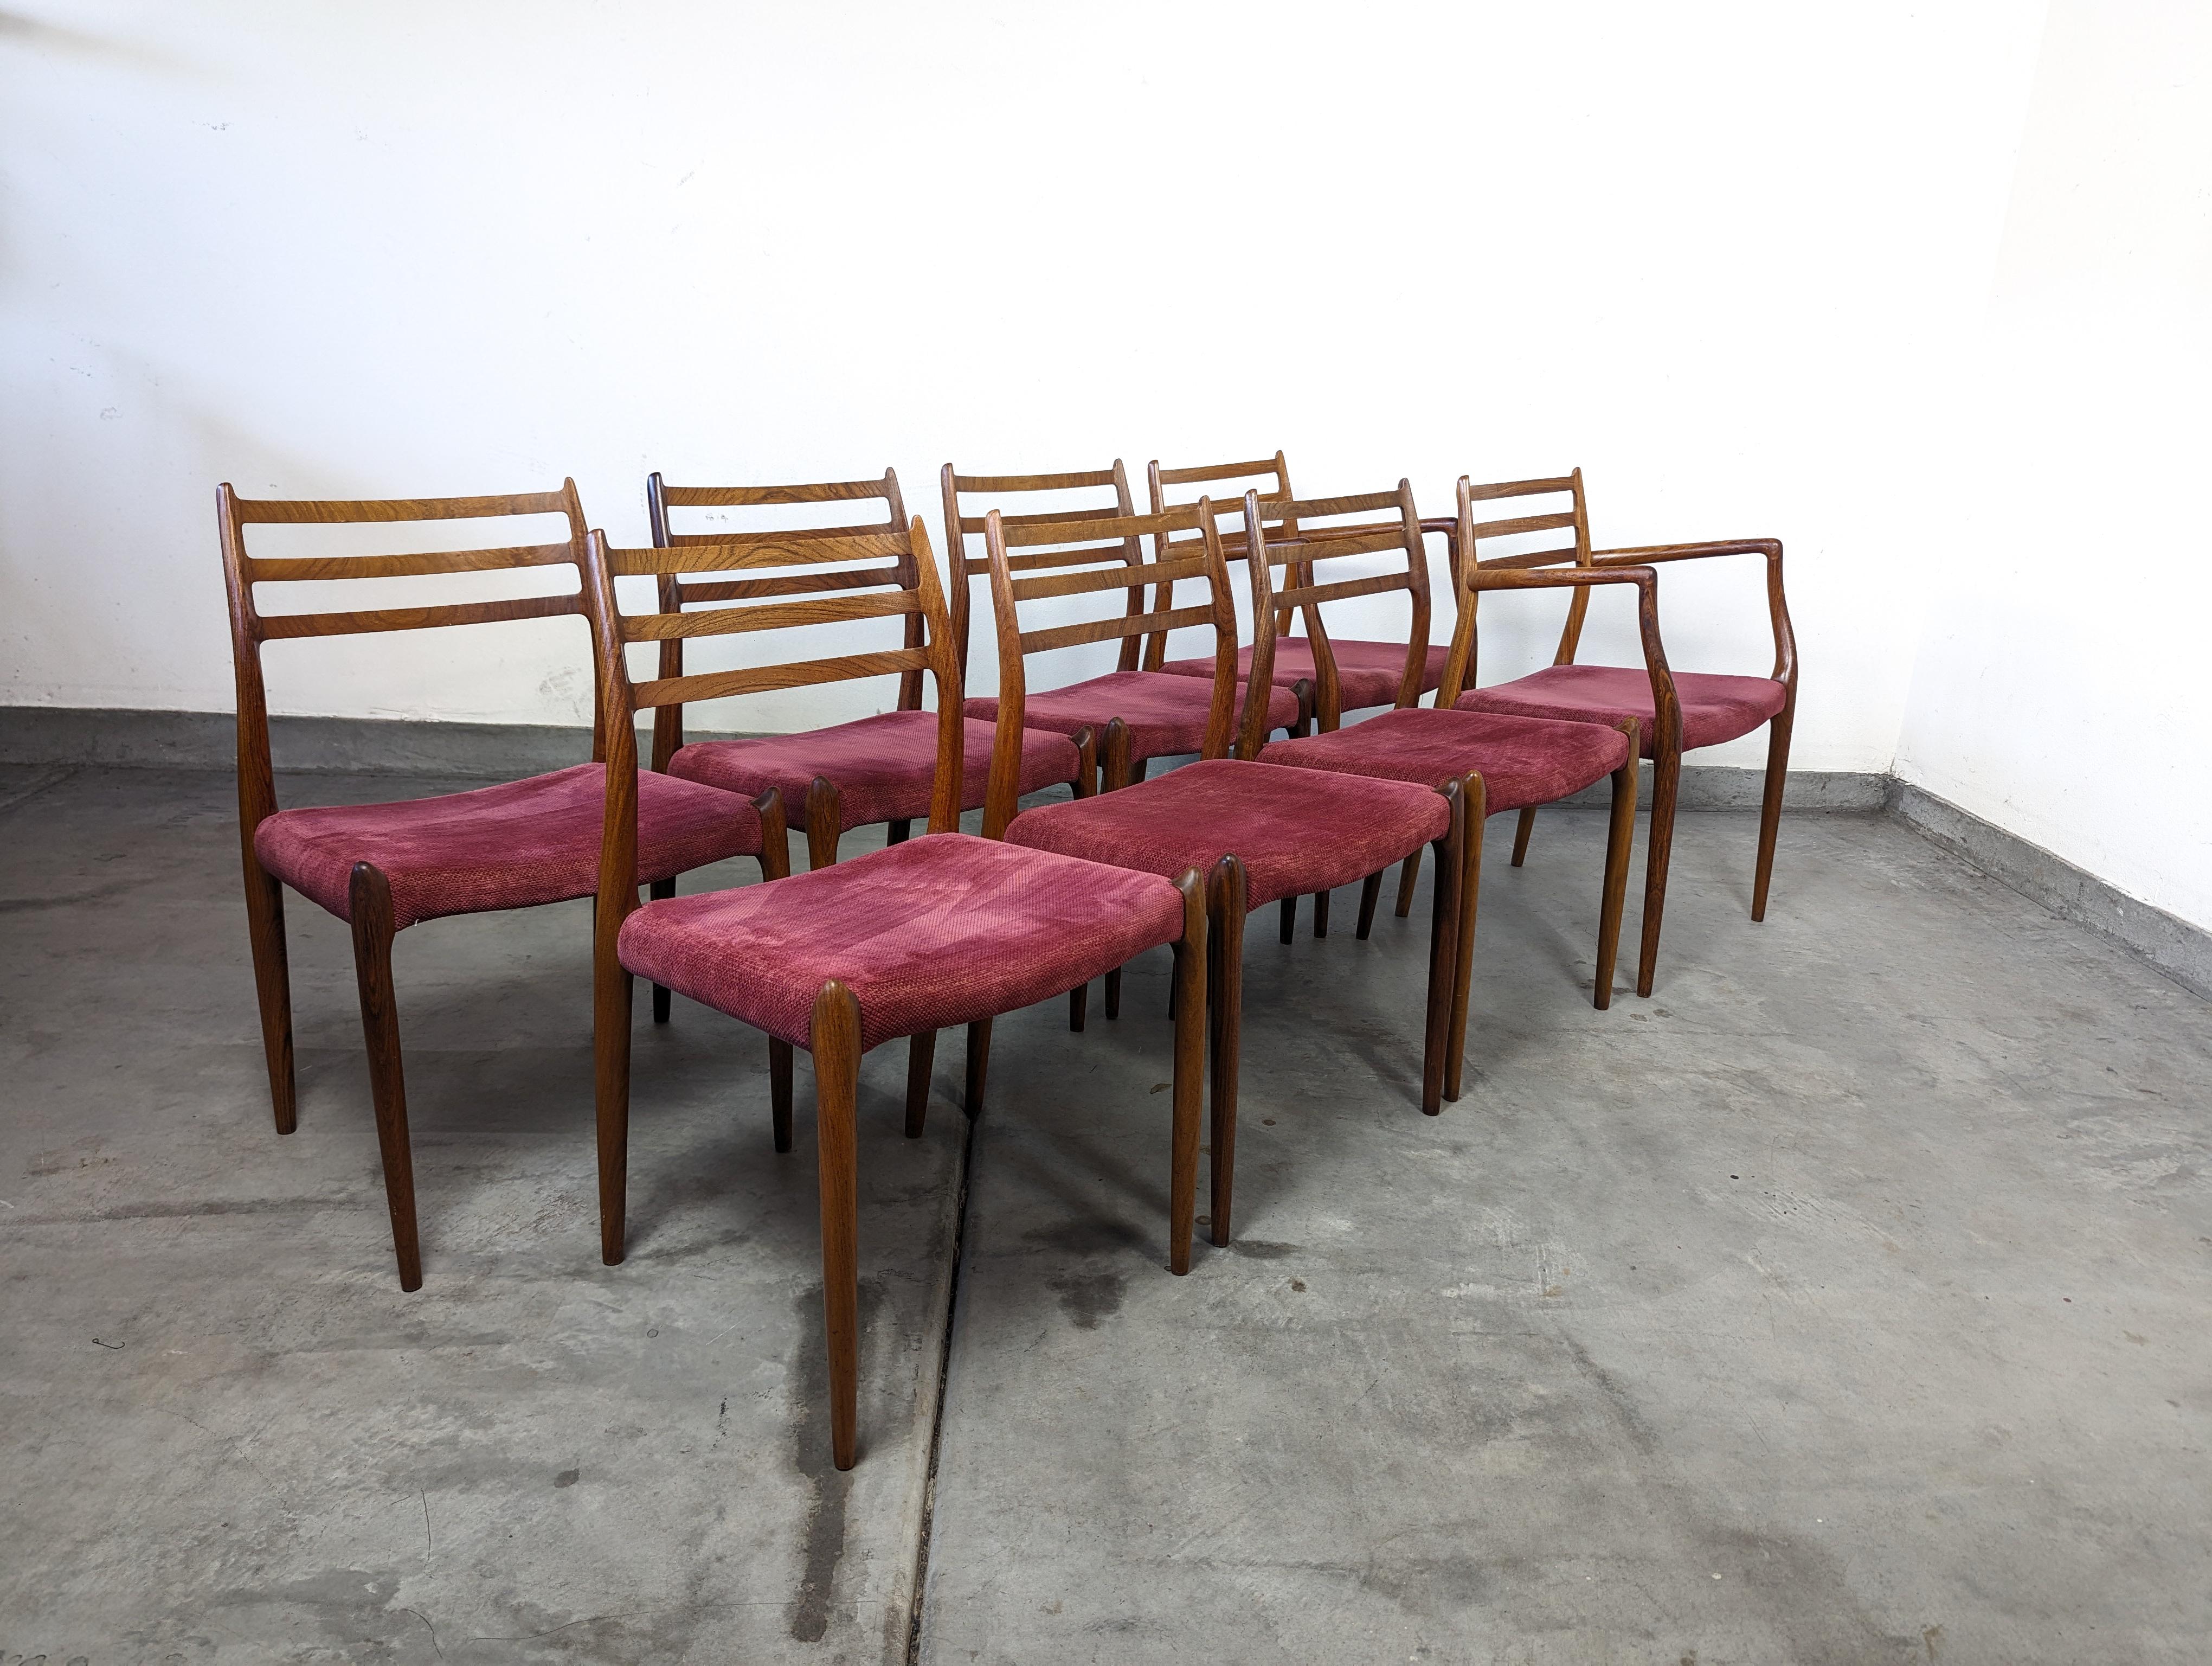 We are thrilled to present this exceptional set of eight mid-century modern dining chairs by the eminent Danish designer, Niels O. Møller for J. L. Møller. Dating back to the 1960s, these pieces showcase the timeless appeal and uncompromised